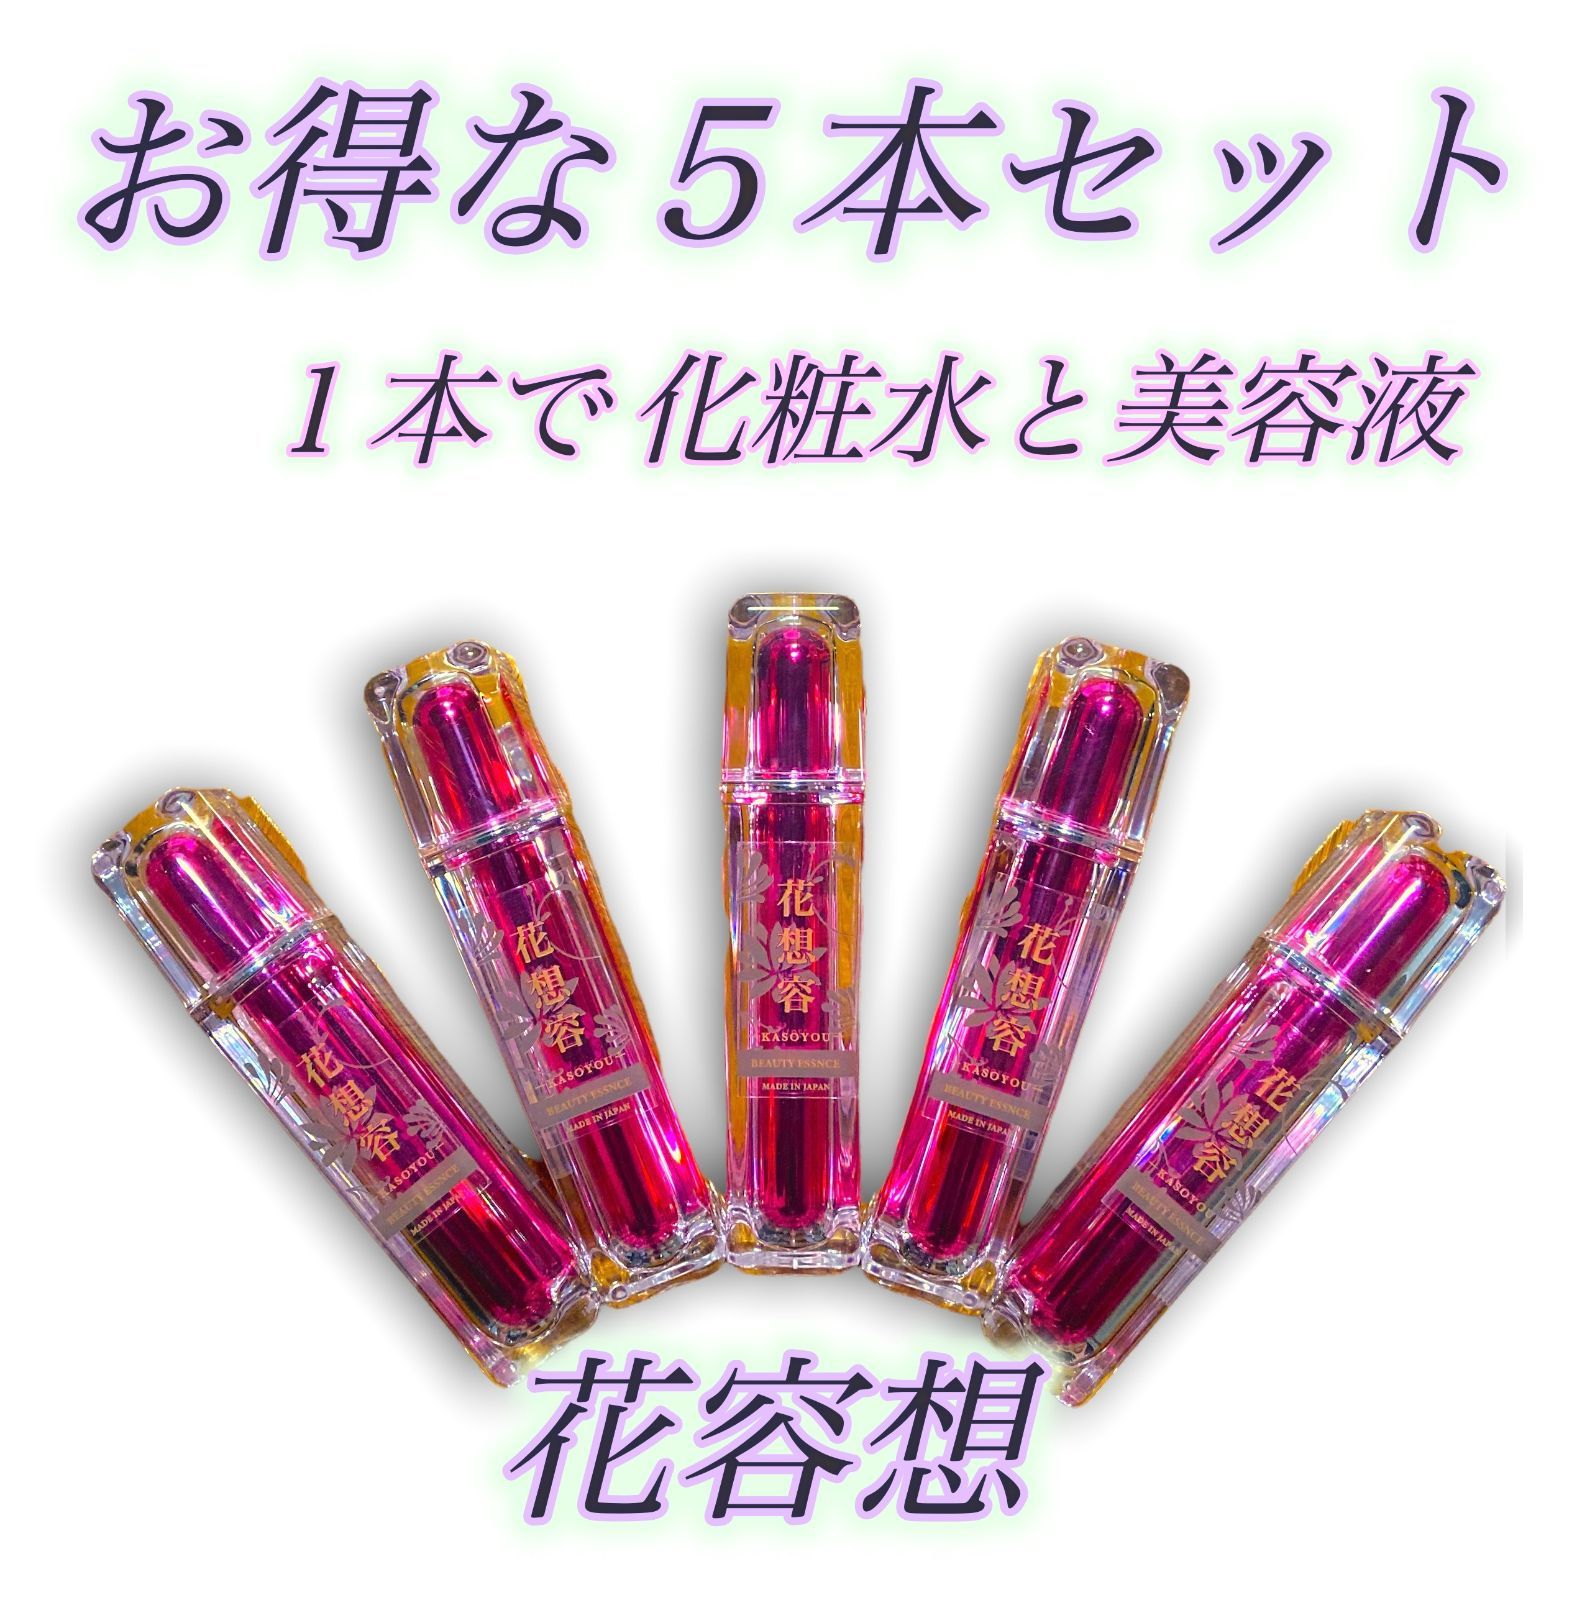 BEAUTY ESSENCE 花想容 化粧水 美容液 保湿 エイジングケア②